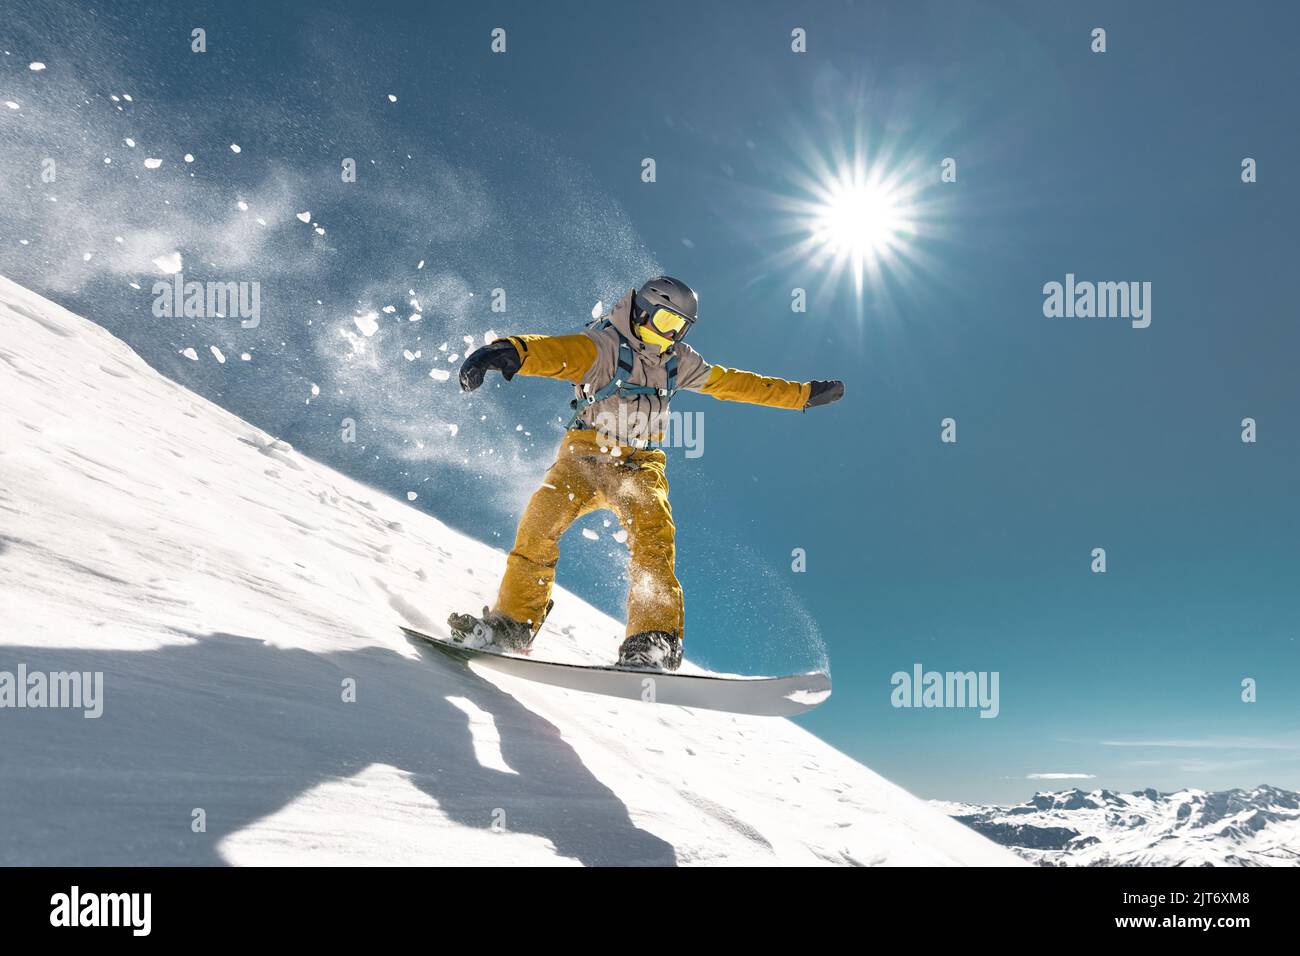 Real snowboarder jumps at alpine offpiste ski slope. Winter sports concept Stock Photo